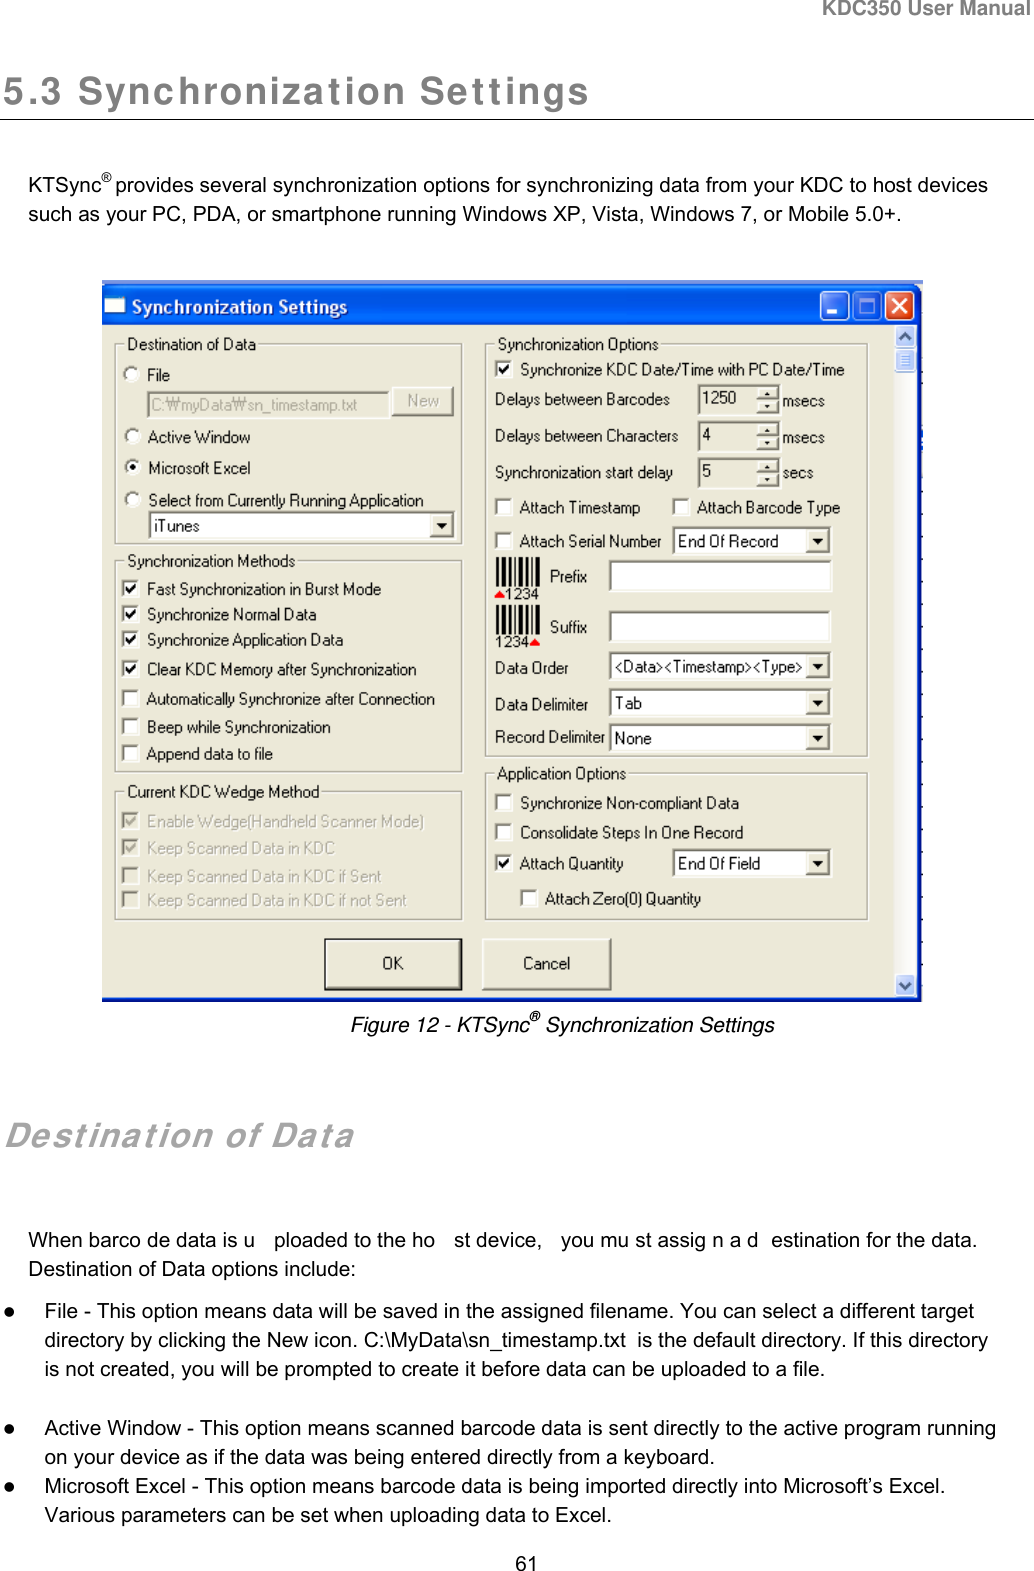 KDC350 User Manual  61  5.3 Synchronization Settings  KTSync® provides several synchronization options for synchronizing data from your KDC to host devices such as your PC, PDA, or smartphone running Windows XP, Vista, Windows 7, or Mobile 5.0+.        Destination of Data  When barco de data is u ploaded to the ho st device,  you mu st assig n a d estination for the data.   Destination of Data options include:  File - This option means data will be saved in the assigned filename. You can select a different target directory by clicking the New icon. C:\MyData\sn_timestamp.txt  is the default directory. If this directory is not created, you will be prompted to create it before data can be uploaded to a file.  Active Window - This option means scanned barcode data is sent directly to the active program running on your device as if the data was being entered directly from a keyboard.  Microsoft Excel - This option means barcode data is being imported directly into Microsoft’s Excel. Various parameters can be set when uploading data to Excel. Figure 12 - KTSync® Synchronization Settings 